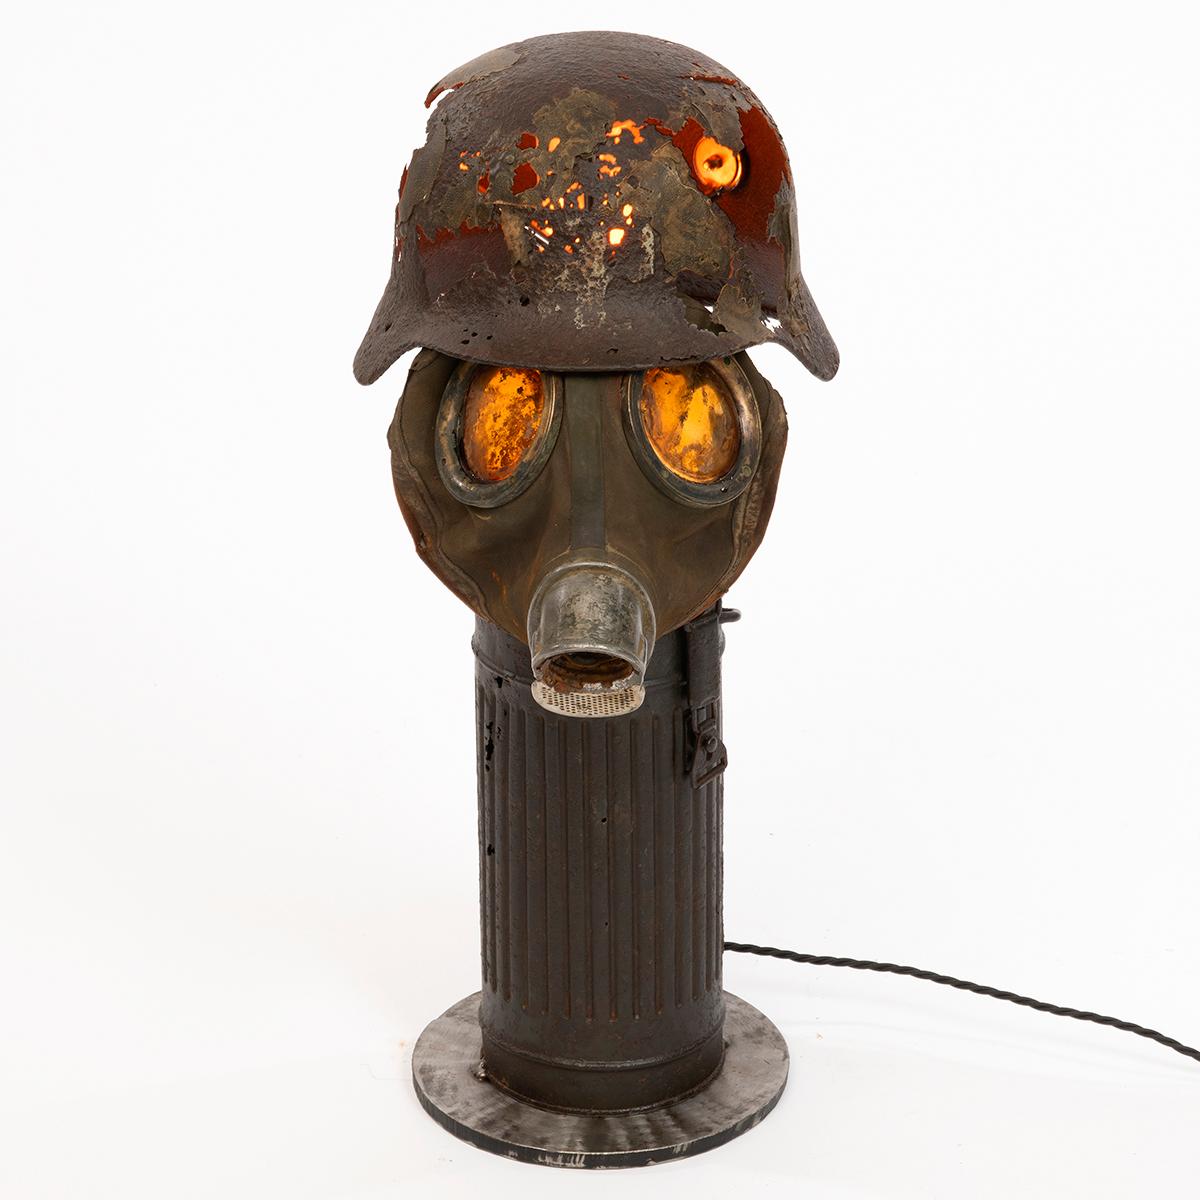 A unique table lamp comprising a German Luftwaffe steel helmet, gas mask and canister formed together to create this piece. In original condition, these historical artefacts were recovered from the Dom river area outside Stalingrad in Russia, which